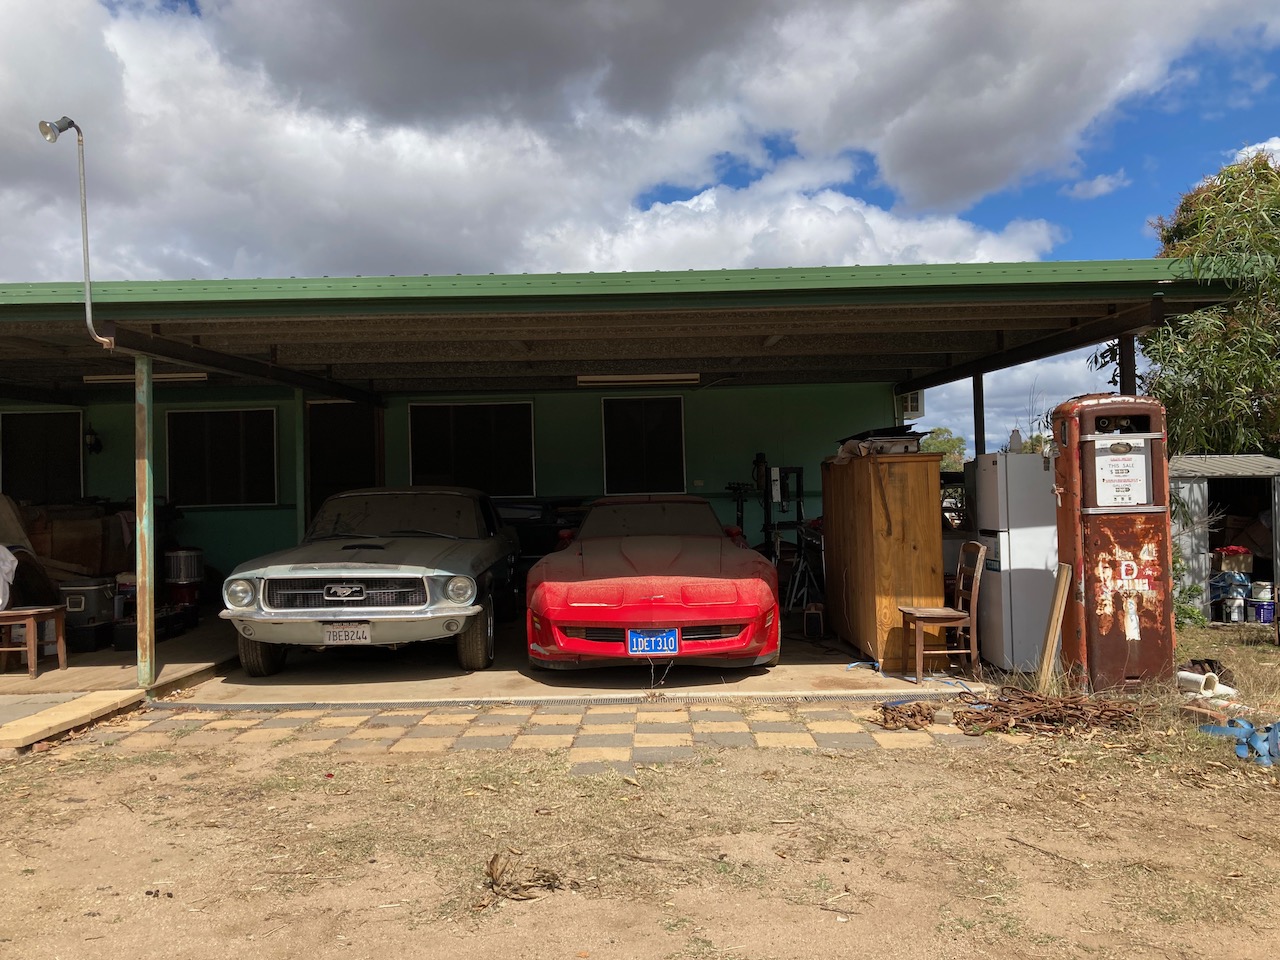 Old American cars in a garage